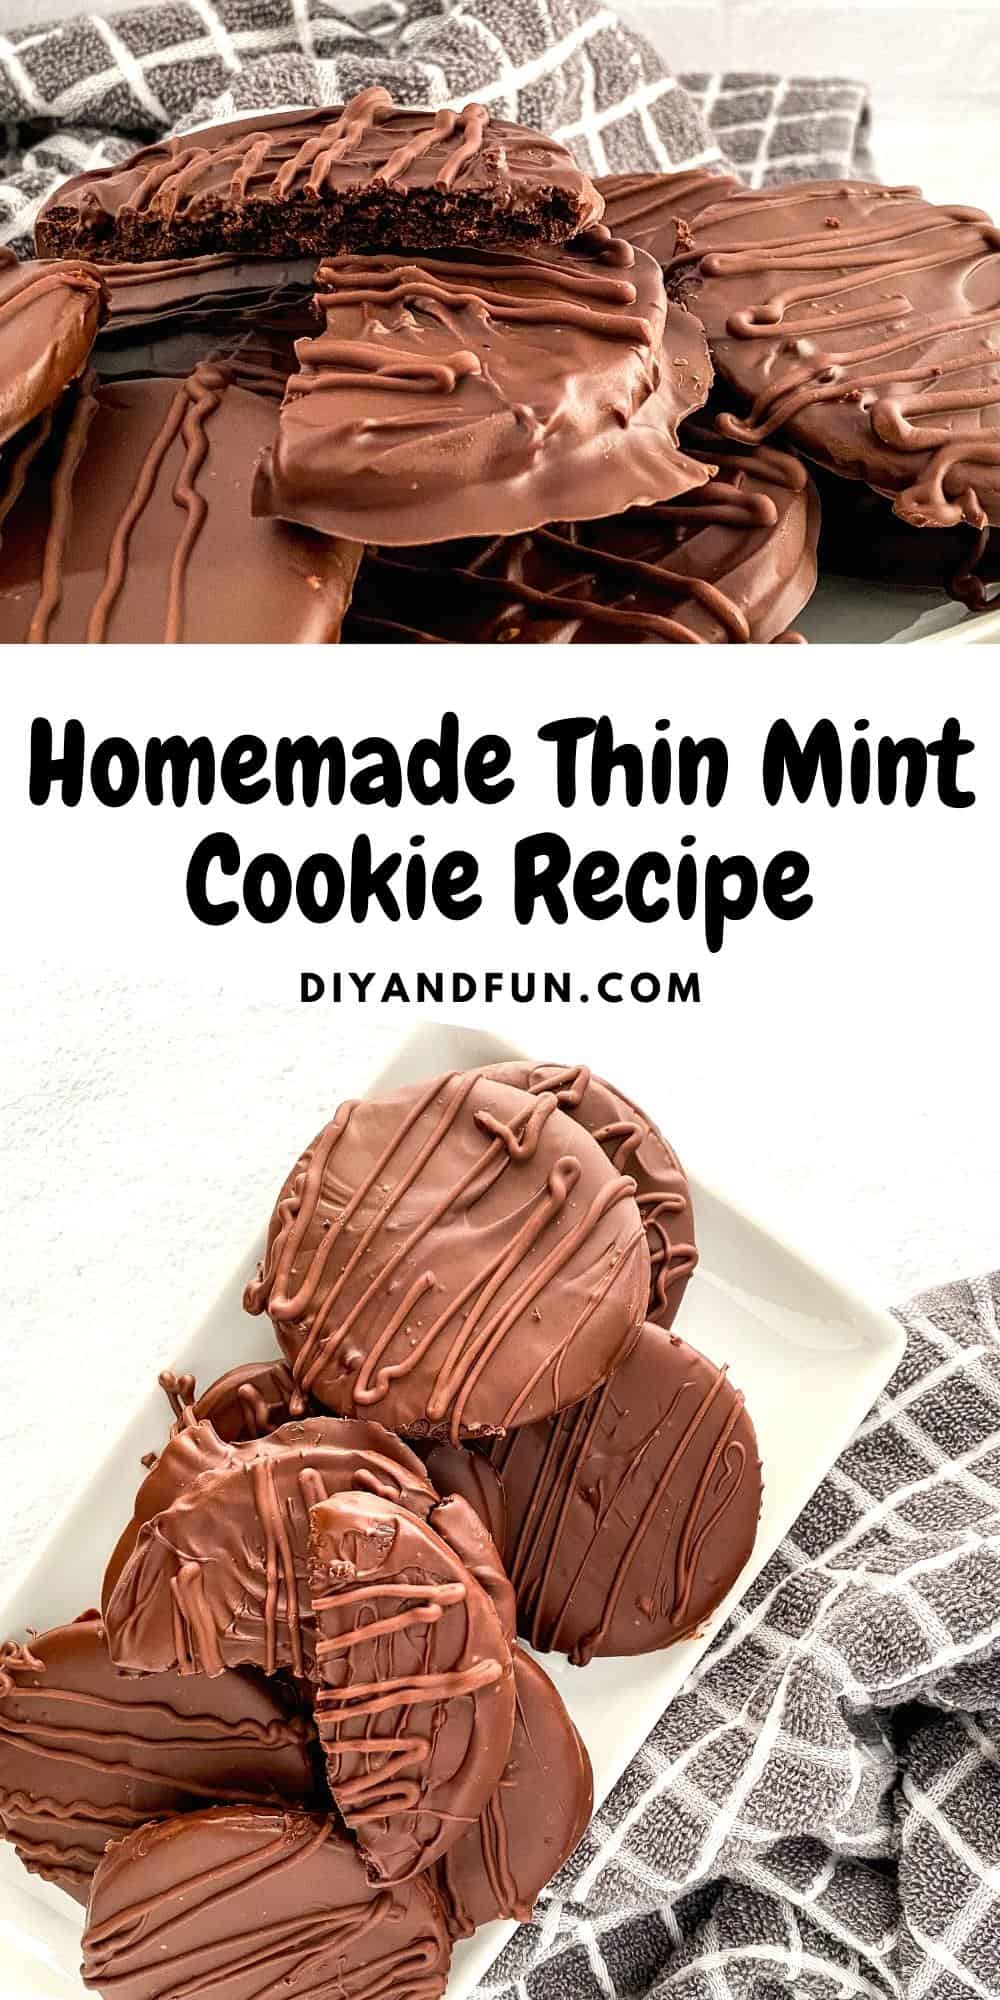 Homemade Thin Mint Cookie Recipe, a delicious recipe for making homemade copycat chocolate covered minty cookies.